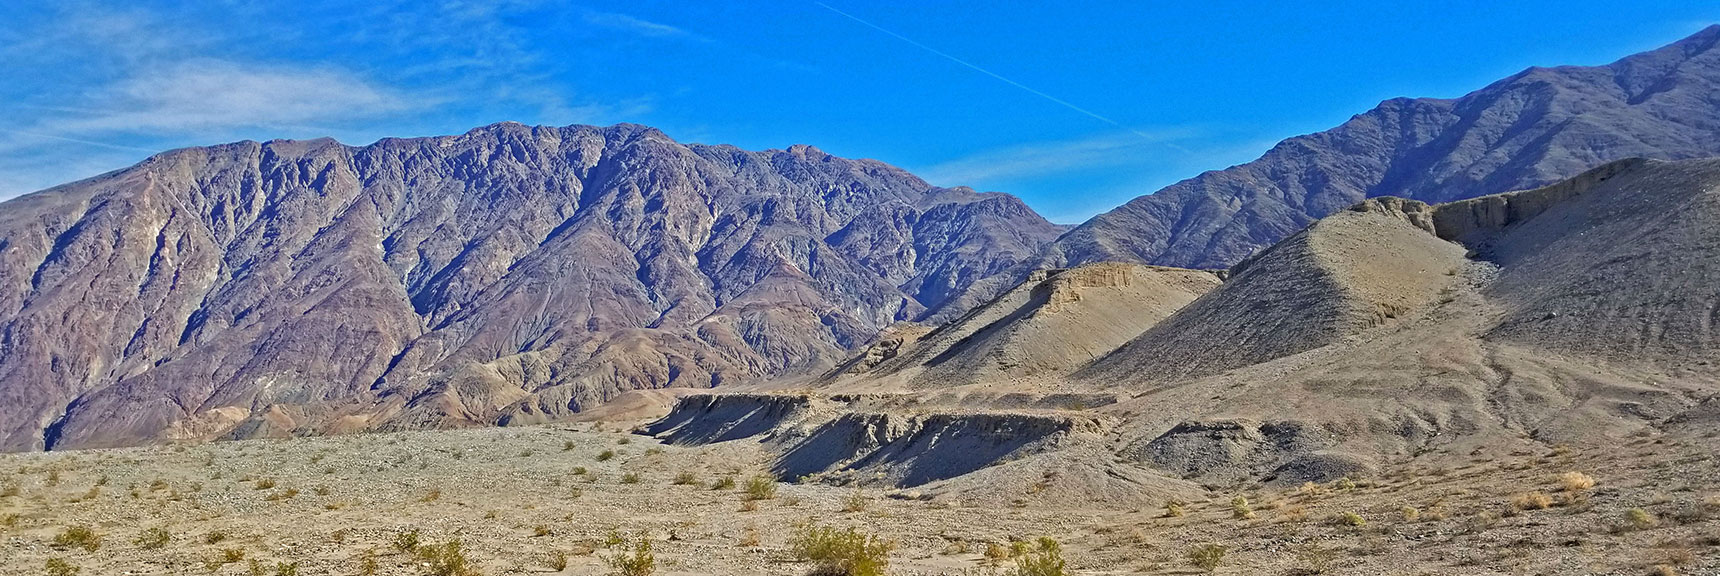 Willow Canyon Entrance is to the Northeast of the Trailhead | Willow Canyon | Death Valley National Park, California